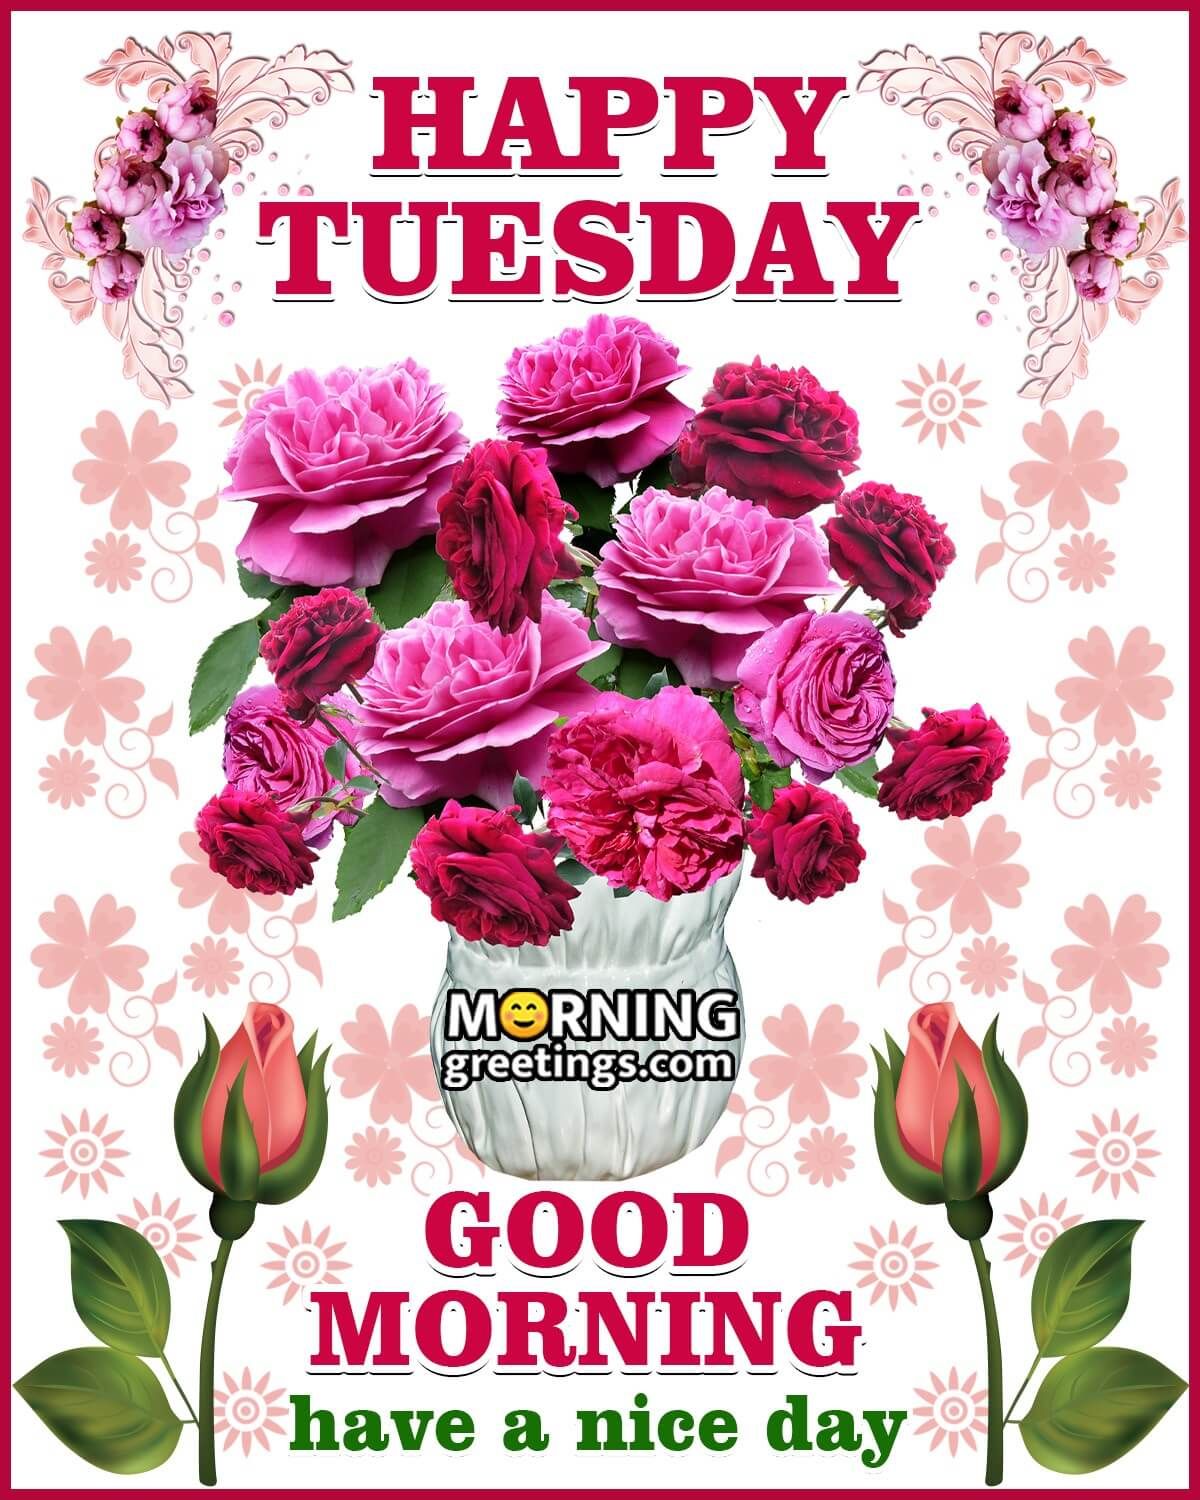 50 Good Morning Happy Tuesday Images - Morning Greetings – Morning Quotes And Wi